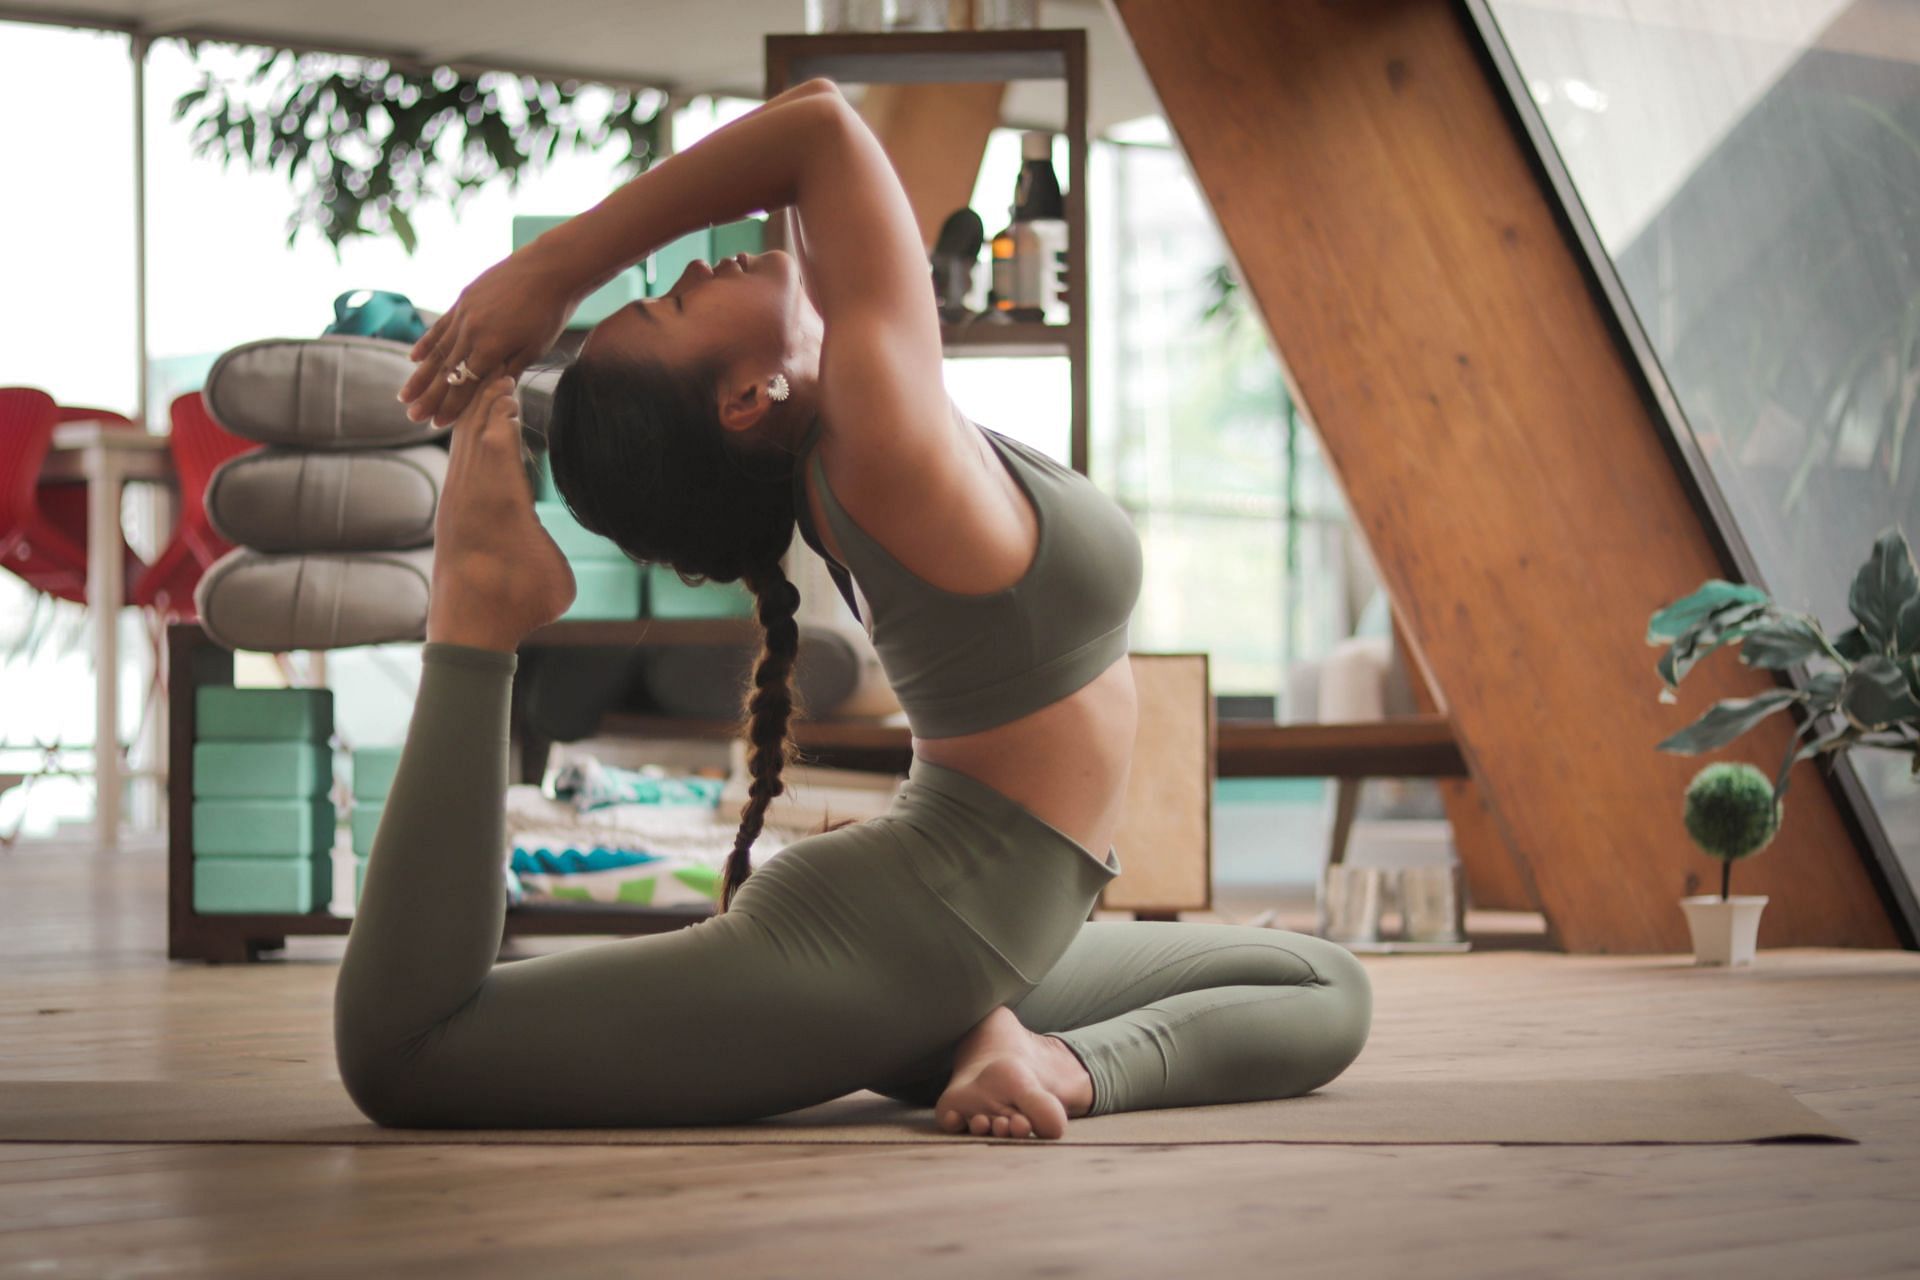 Yoga exercises are one of the most effective ways to improve posture (Image via Unsplash/Carl Barcelo)